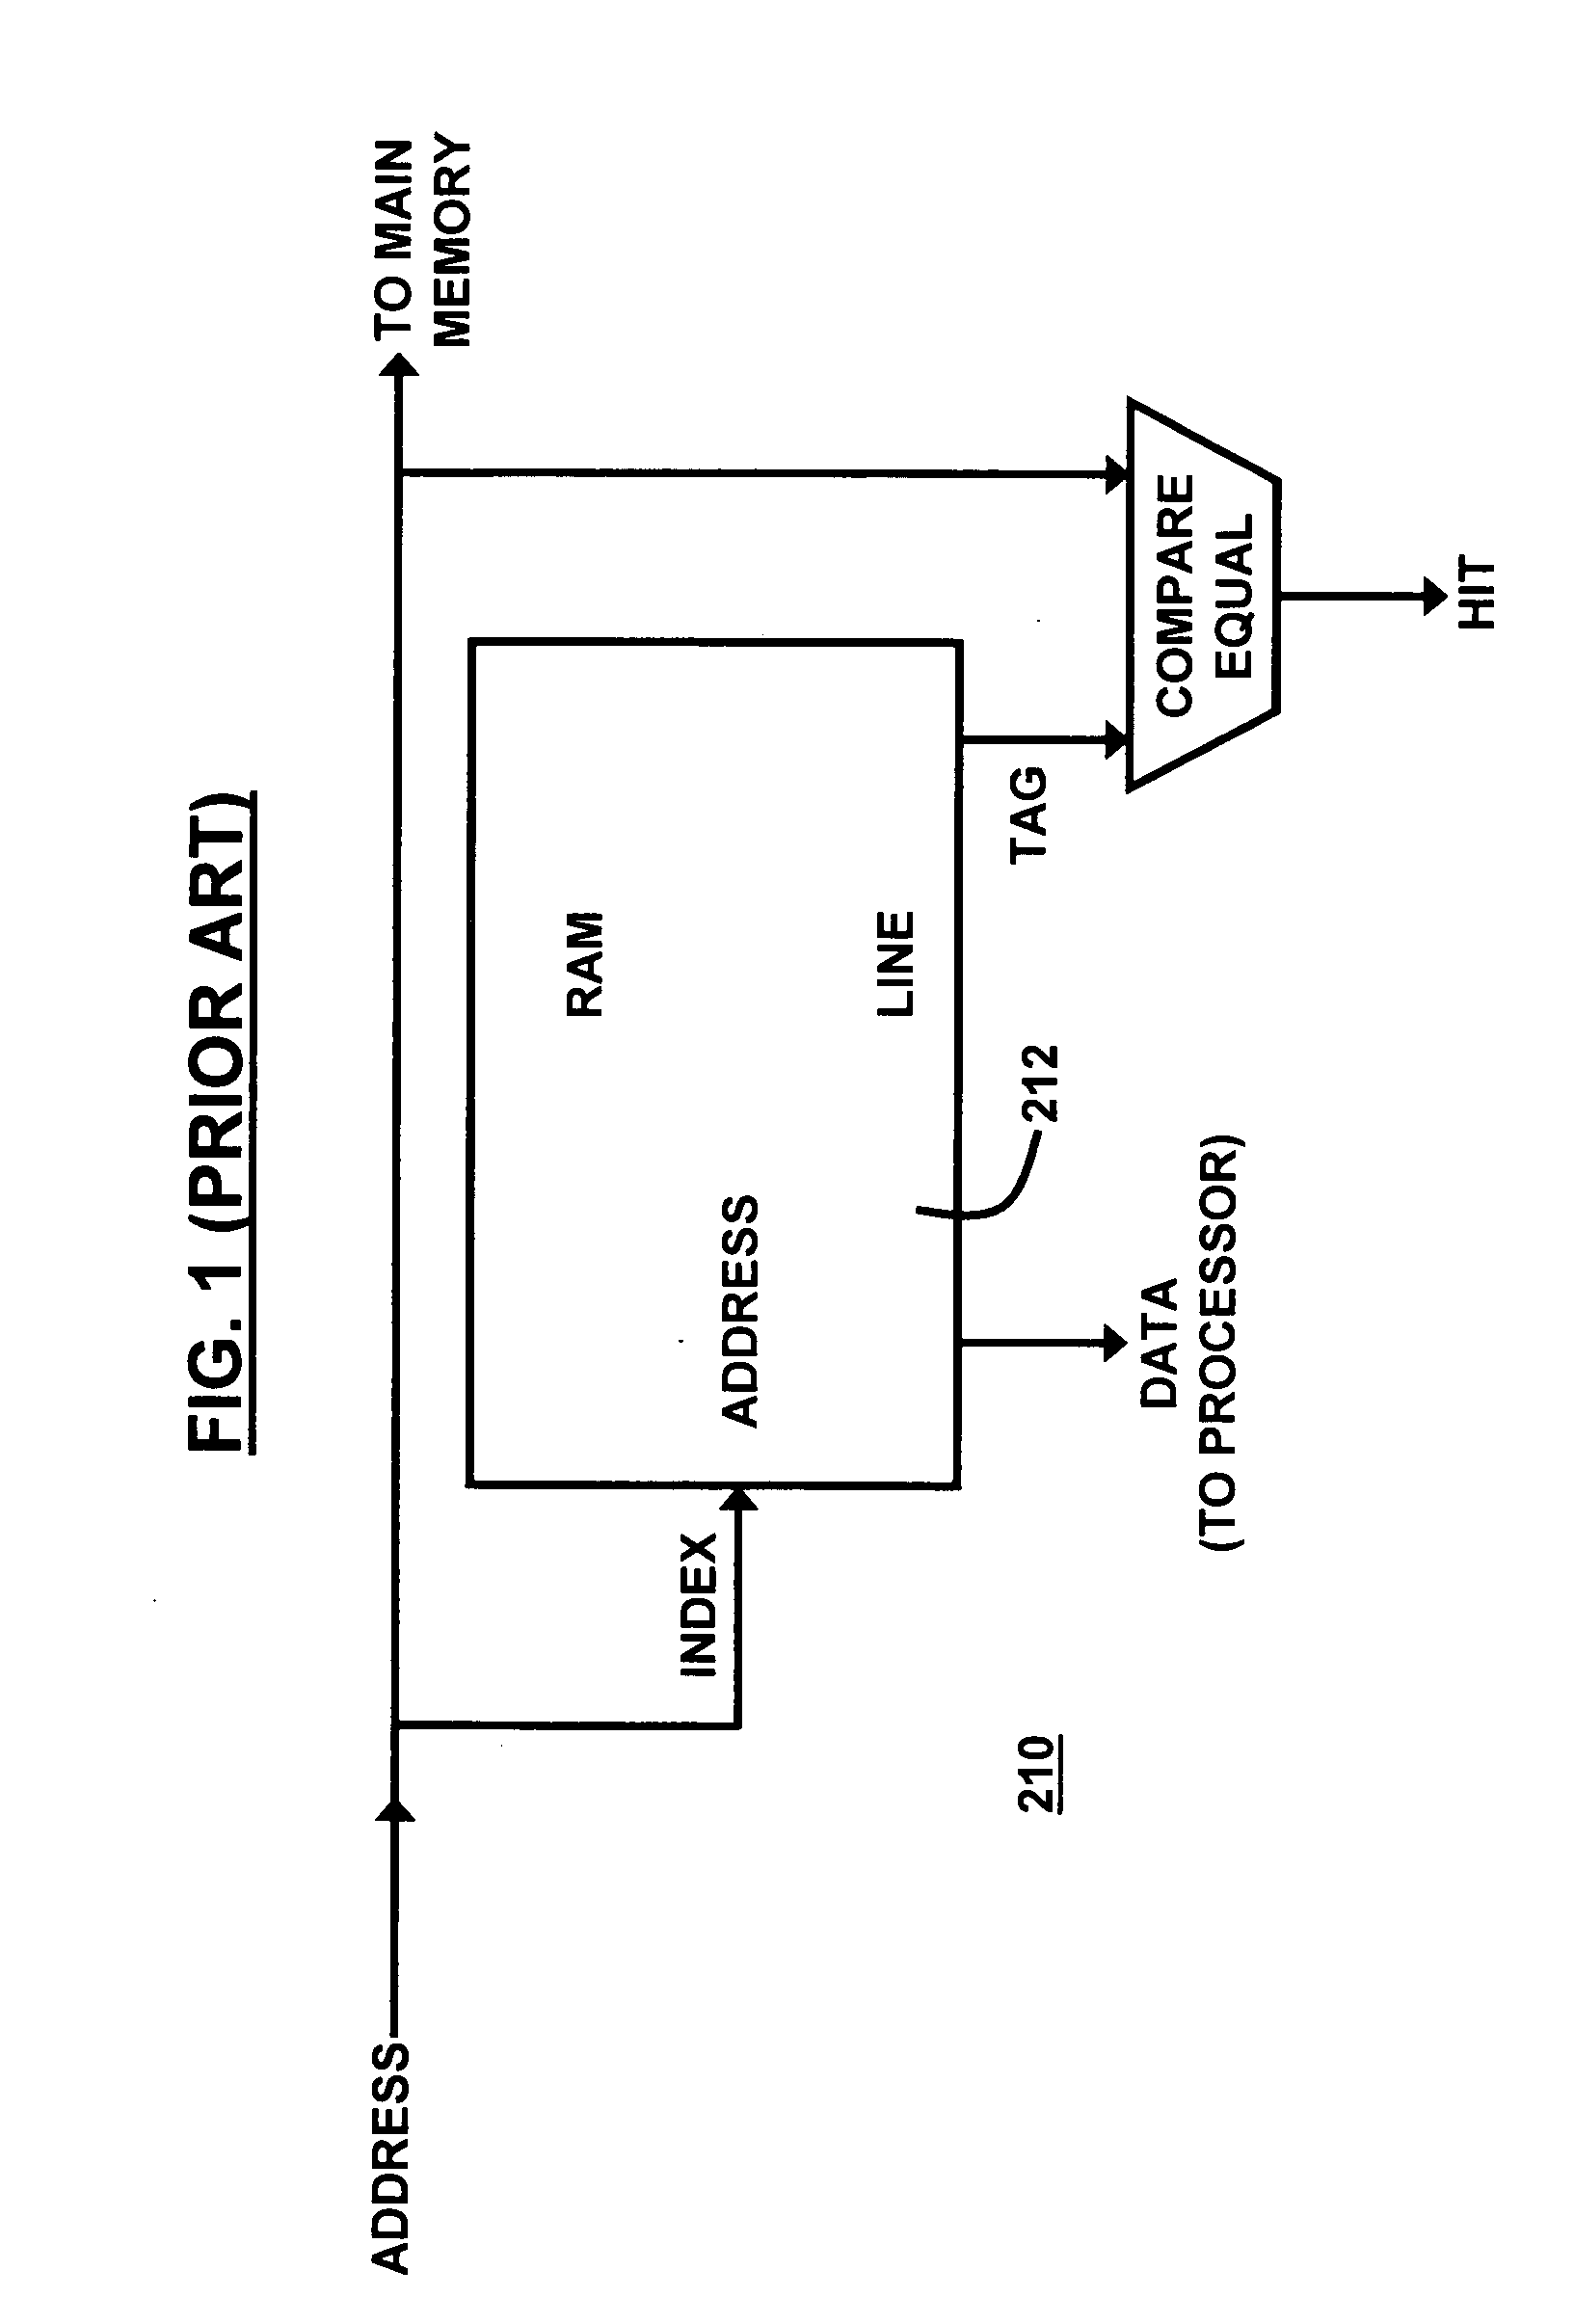 Method and system of clock with adaptive cache replacement and temporal filtering